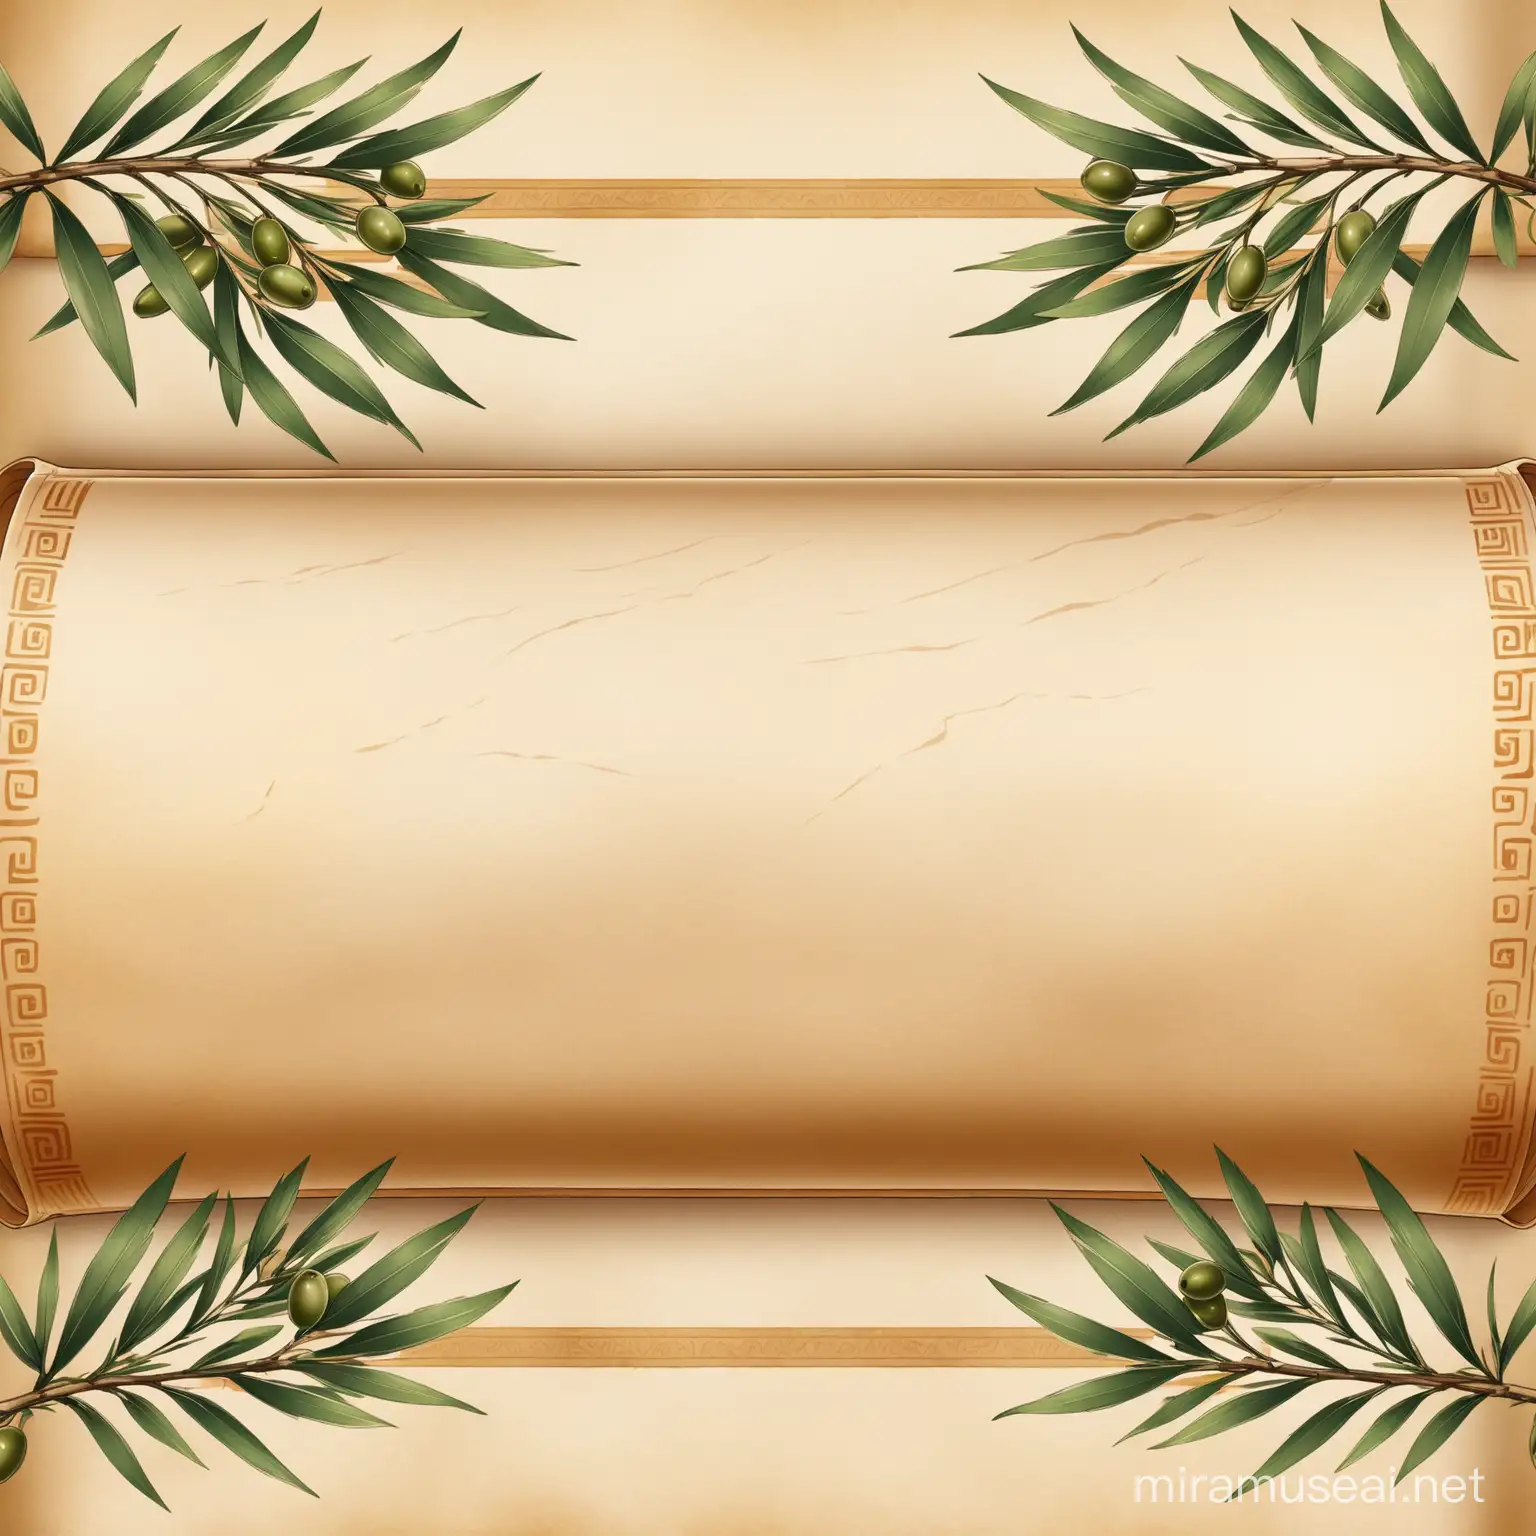 Ancient Greek Scroll with Olive Branch Adornments and Column Borders